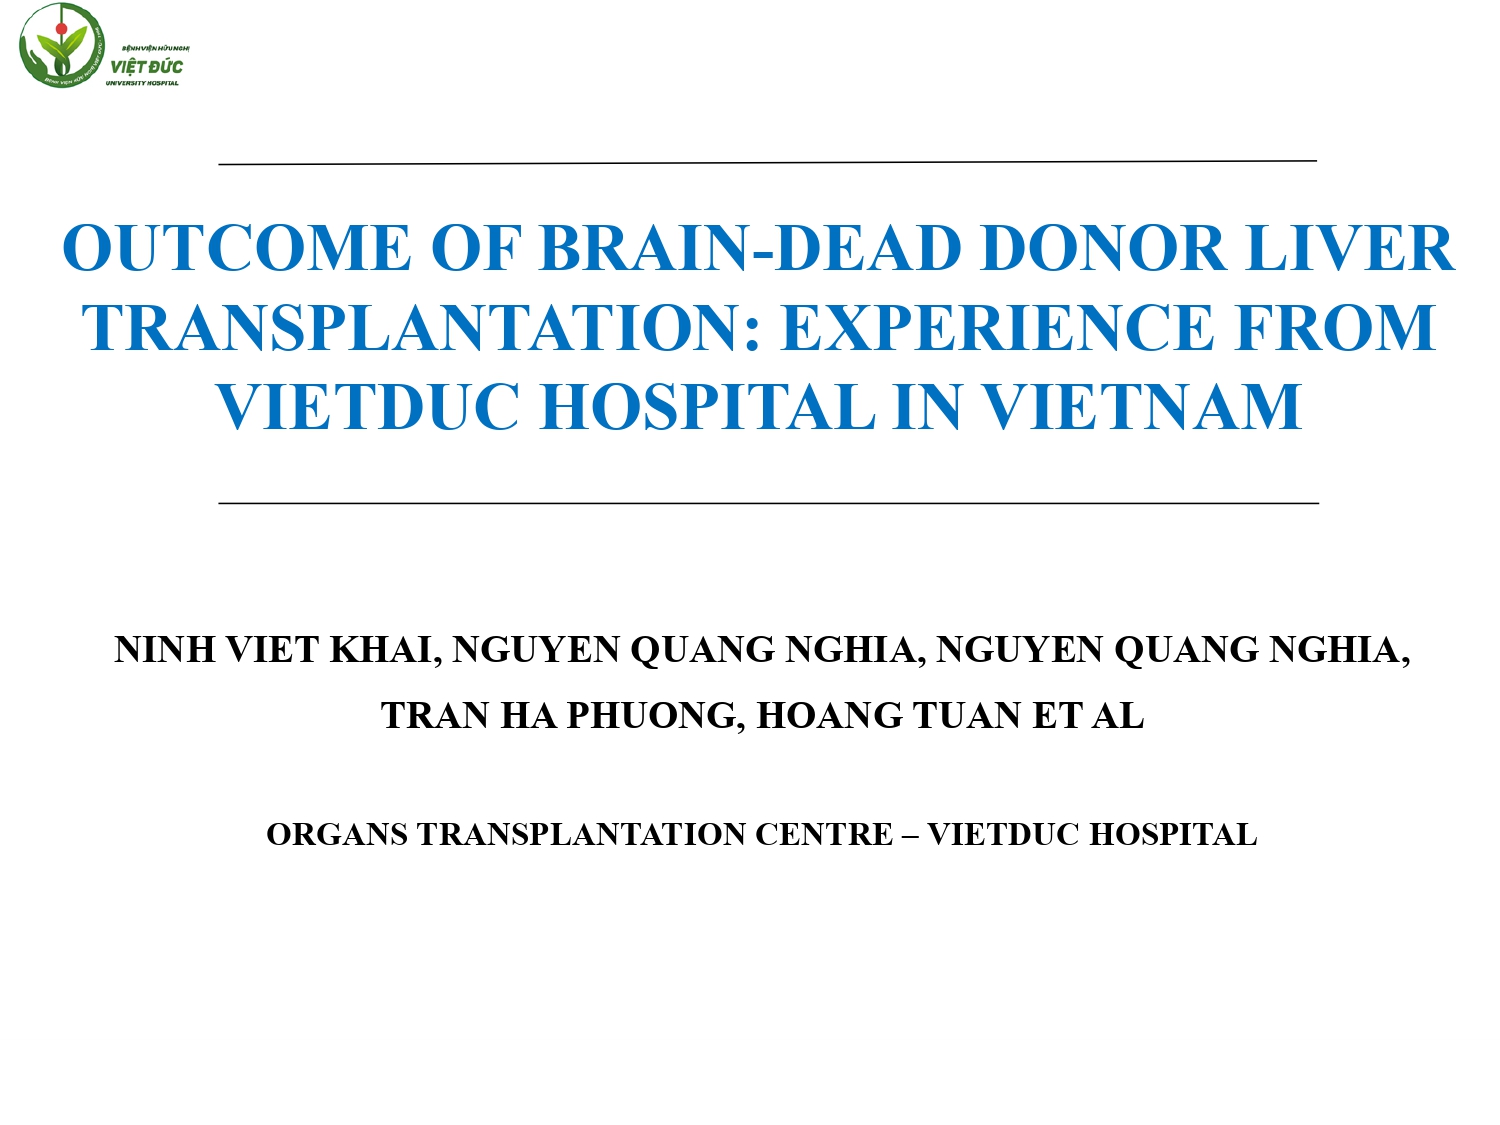 Outcome of brain dead donor liver transplantation: Experience from Viet Duc hospital in Vietnam